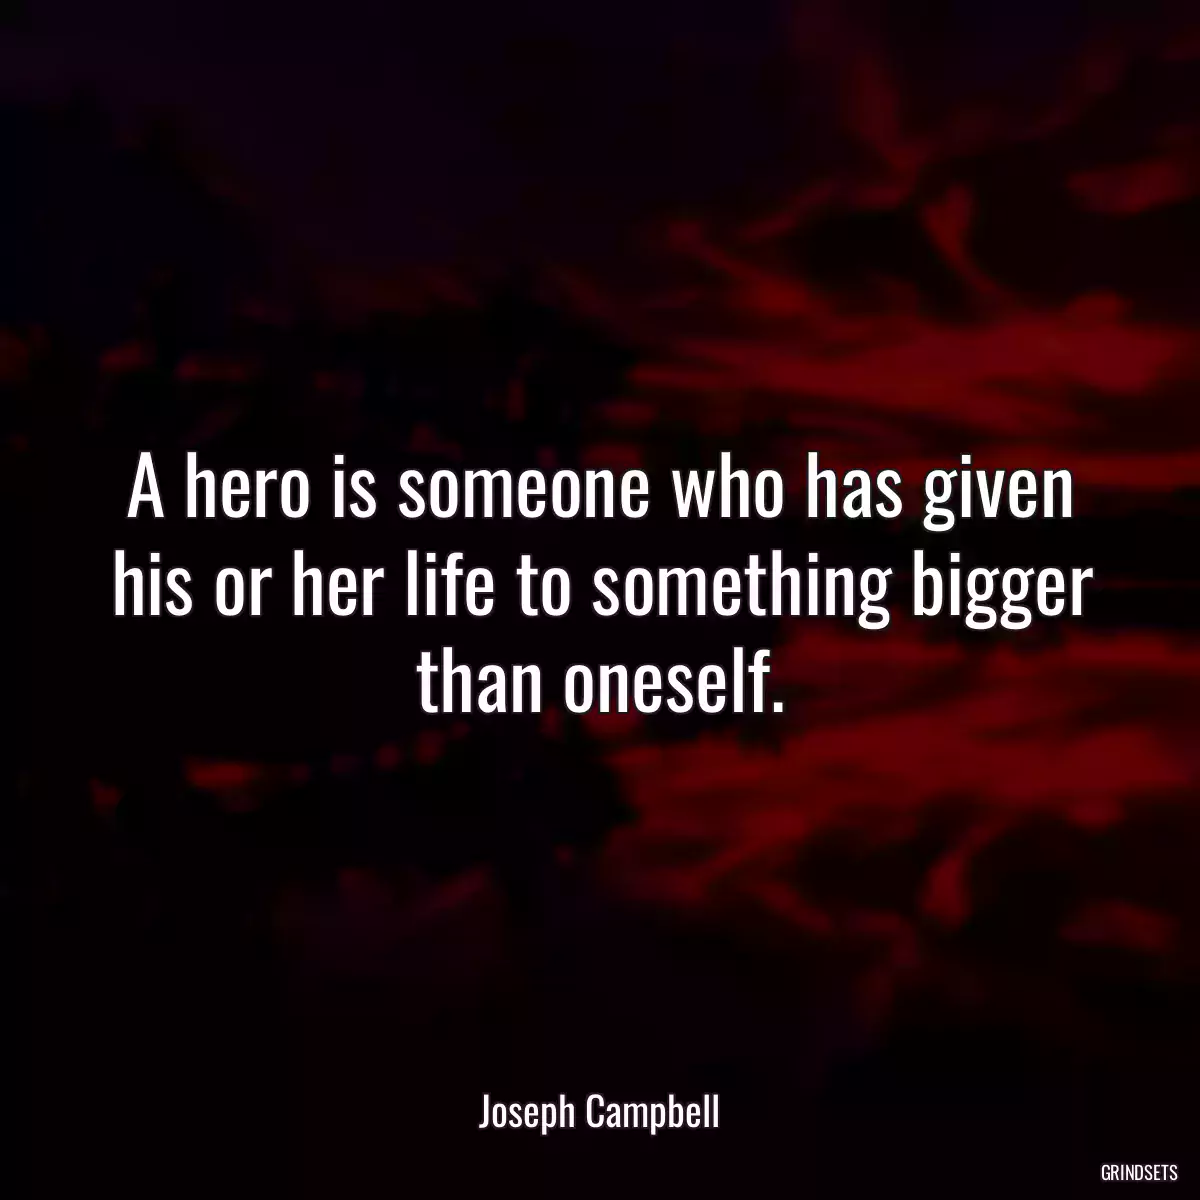 A hero is someone who has given his or her life to something bigger than oneself.